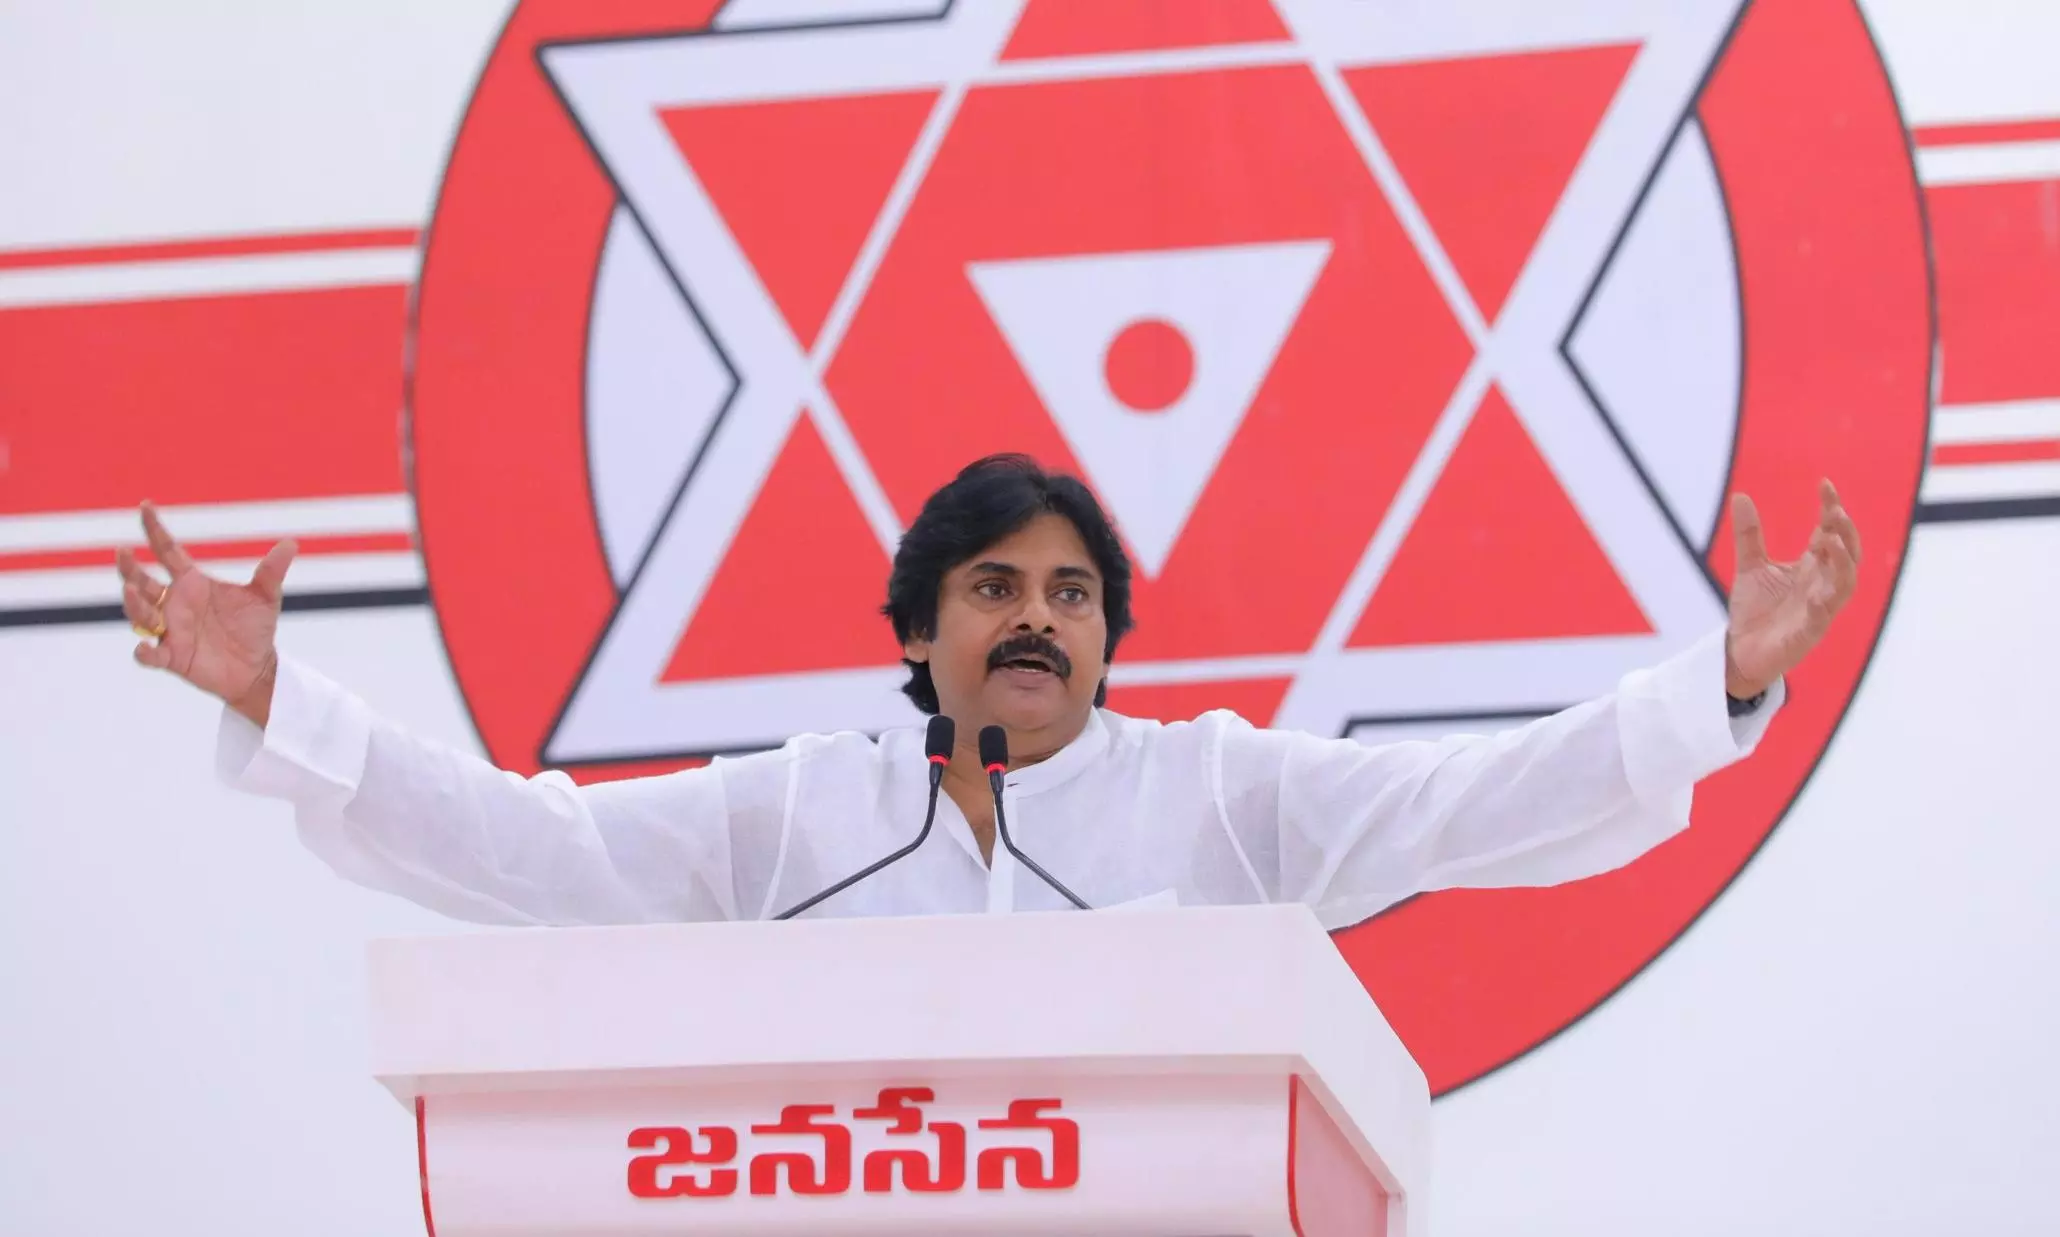 PK announces he will contest from Pithapuram assembly seat